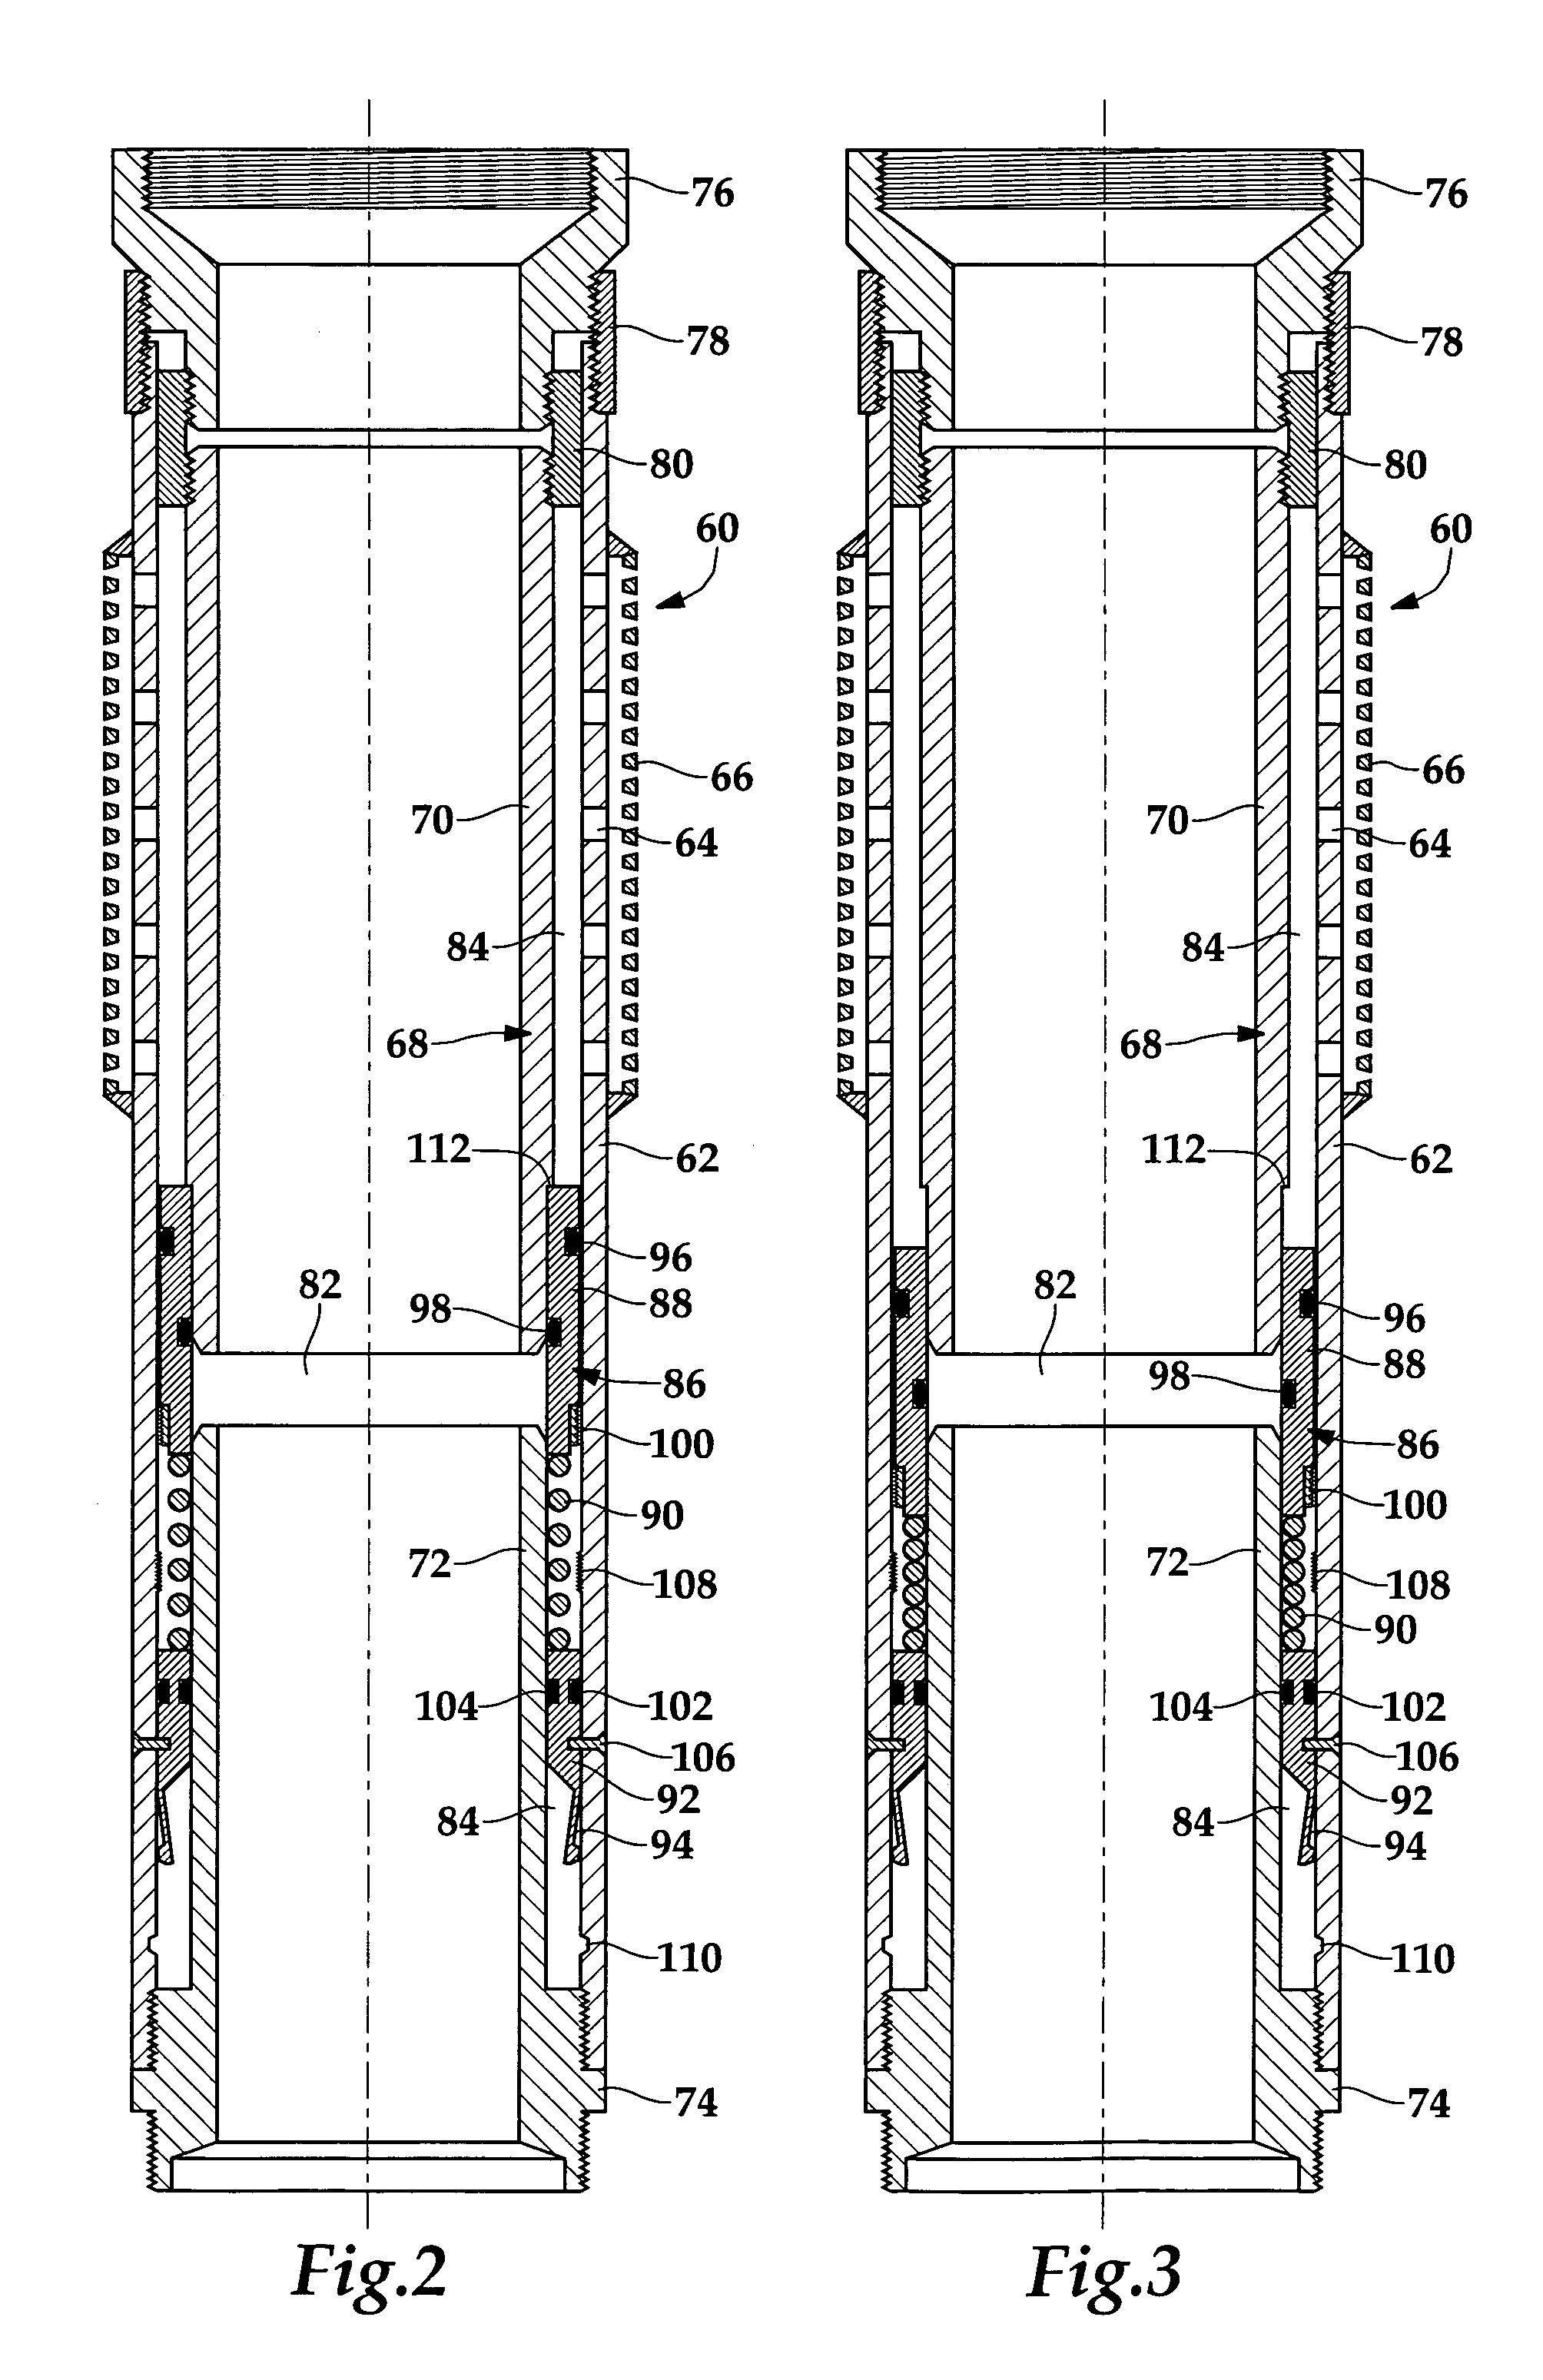 Sand control screen assembly having fluid loss control capability and method for use of same